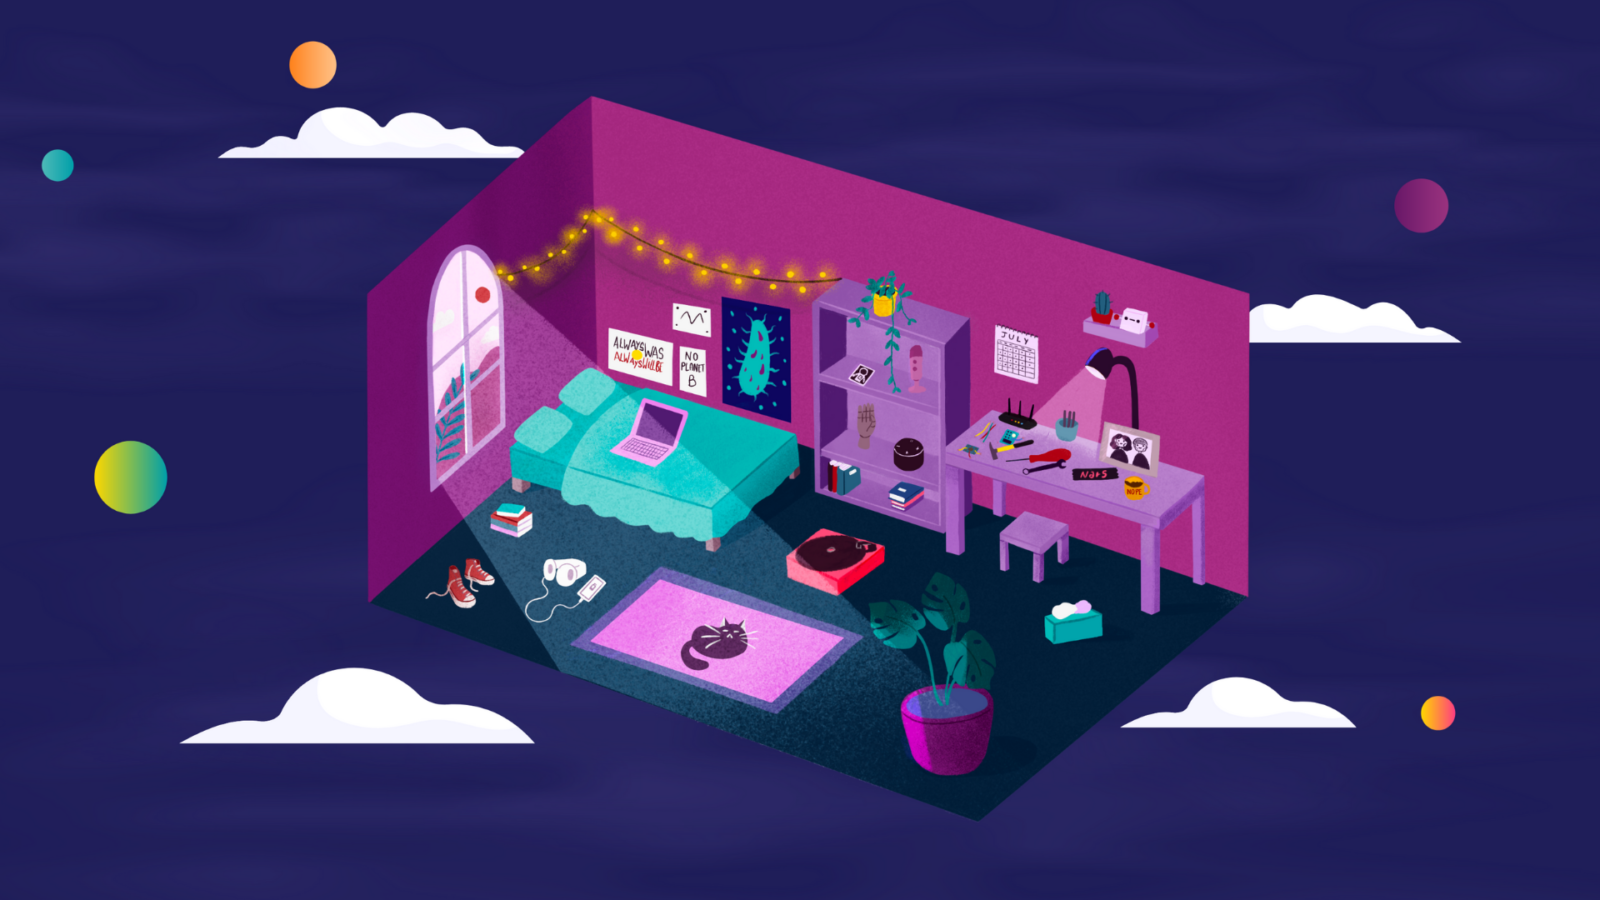 Bedroom floating on dark purple background. Bedroom has purple walls, a green bed, and some clutter - including a cat, tech gear, a bookshelf, and a plant.